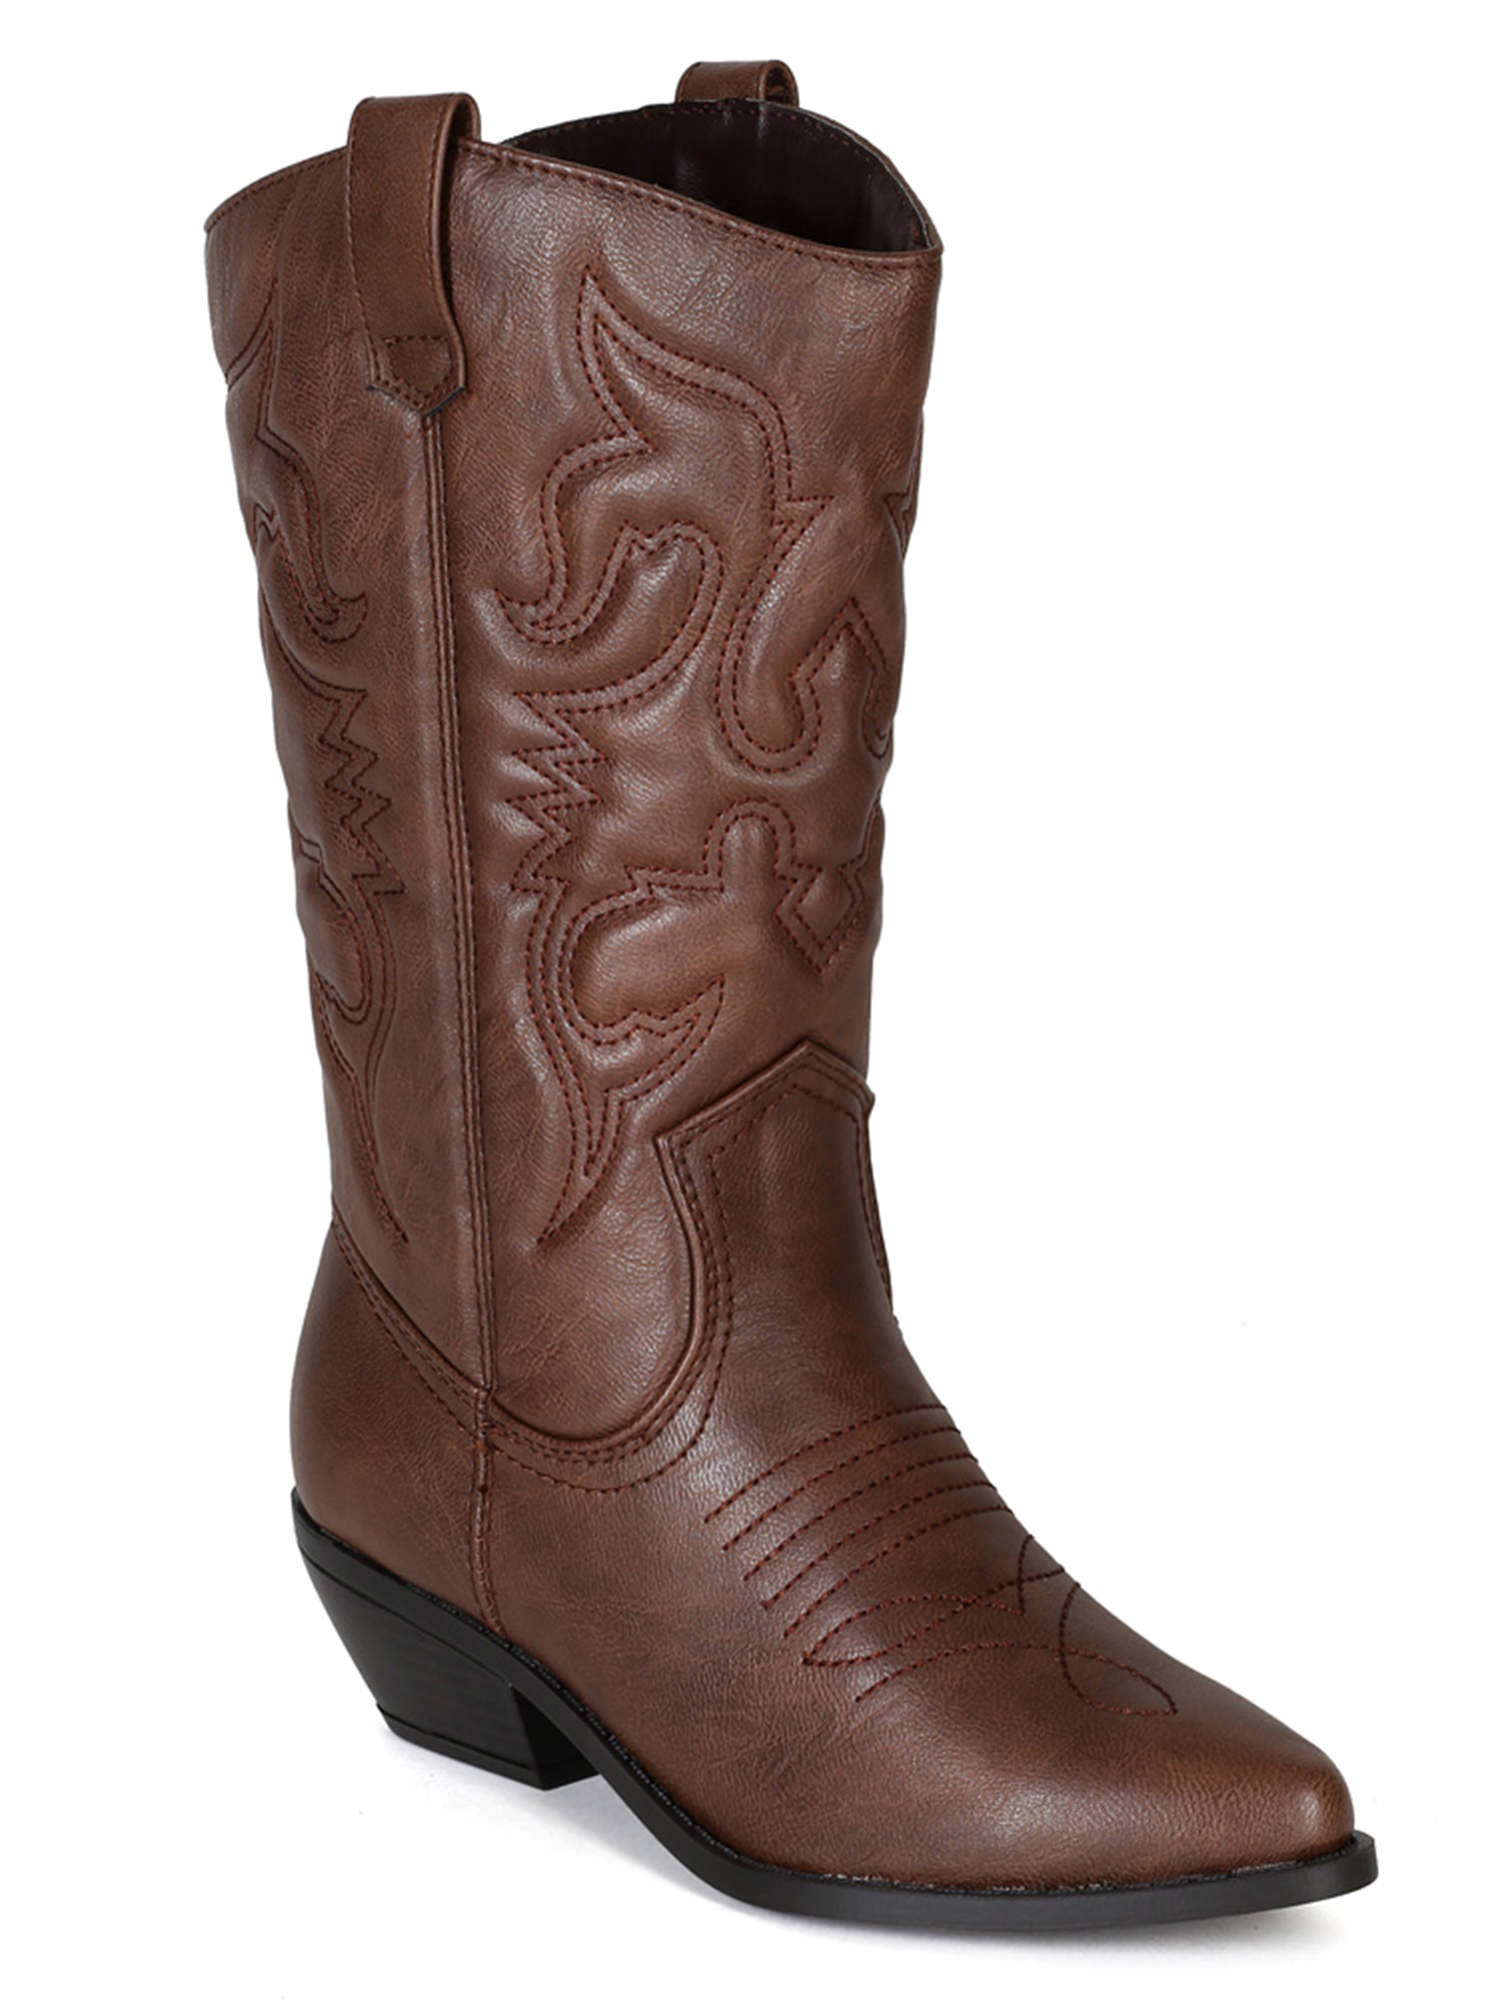 Reno Tan Brwon Soda Cowboy Western Stitched Boots Women Cowgirl Boots Pointy Toe Knee High - image 1 of 3